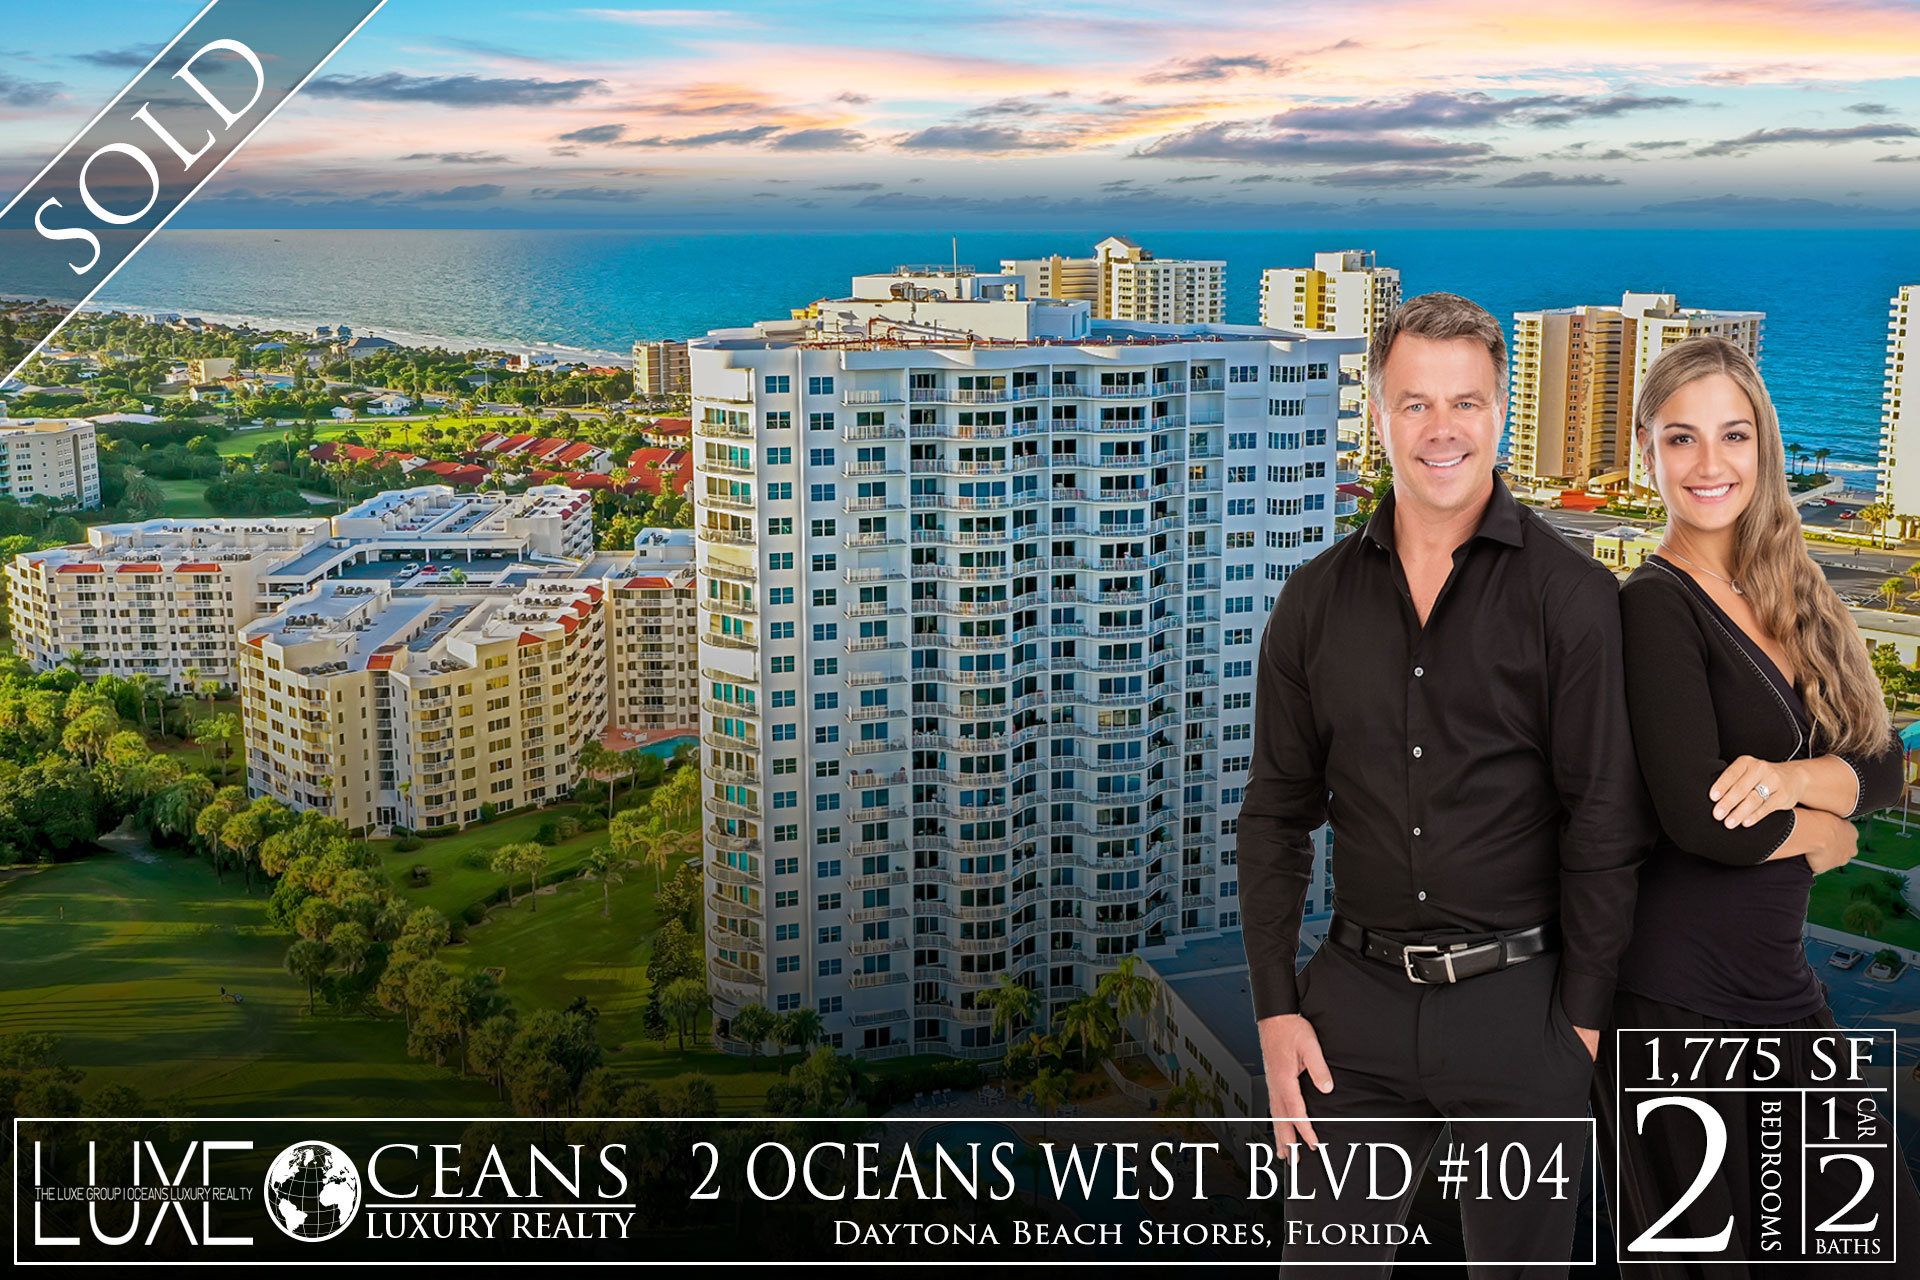 Daytona Beach Shore Condos For Sale. 2 Oceans West Blvd 104. Just Sold in Oceans Grande. Call The LUXE Group at Oceans Luxury Realty 386-299-4043